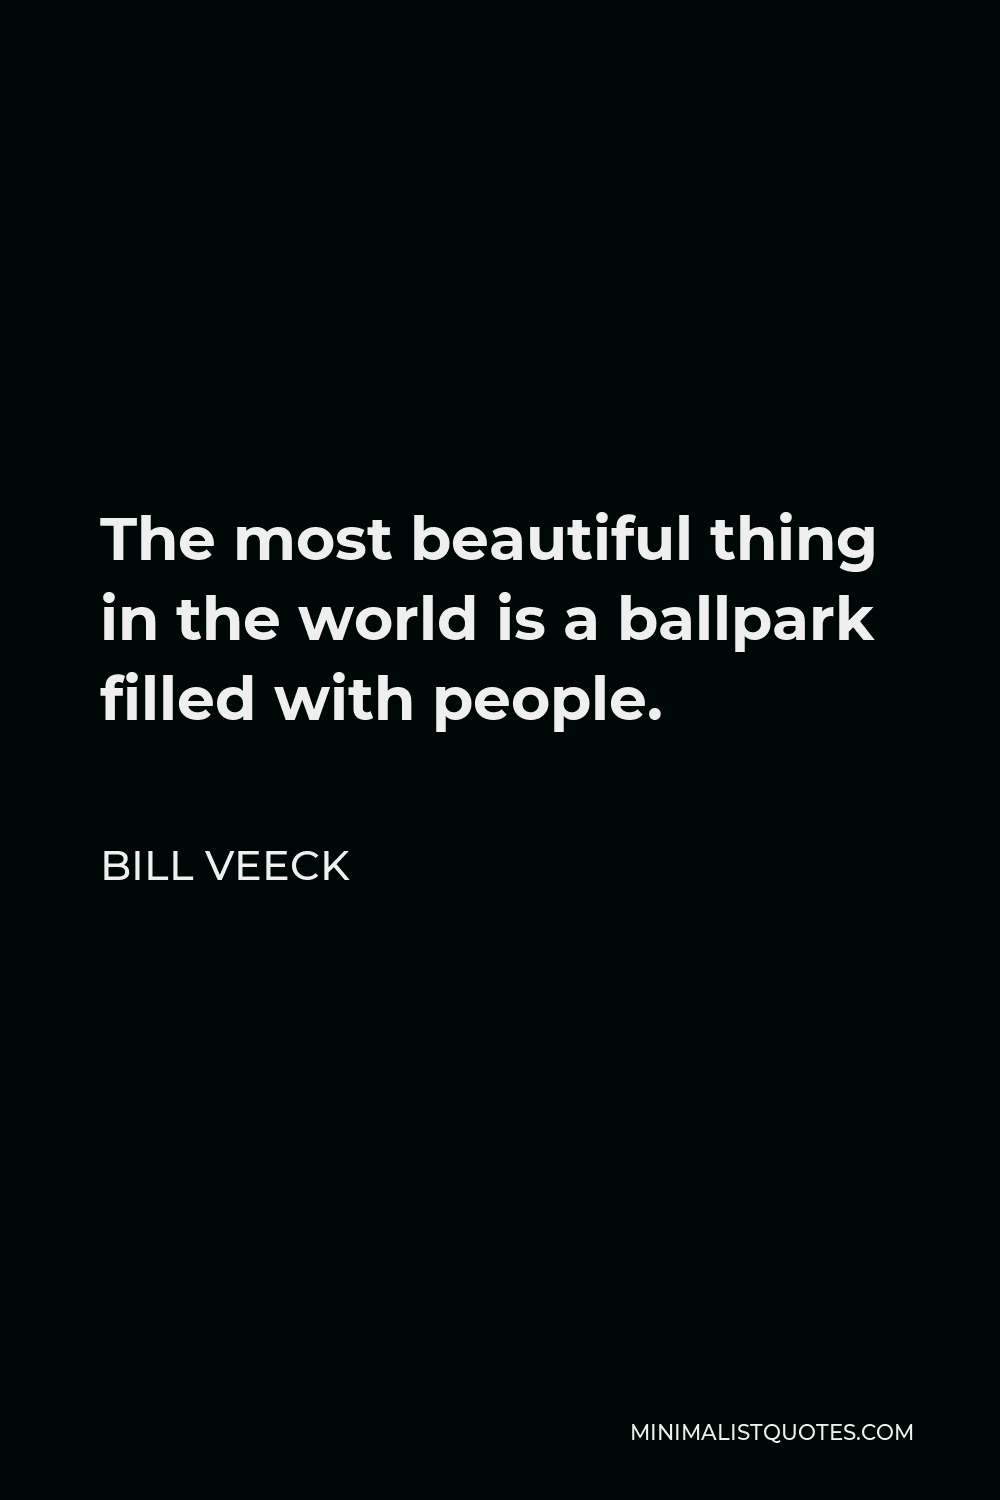 Bill Veeck Quote - The most beautiful thing in the world is a ballpark filled with people.